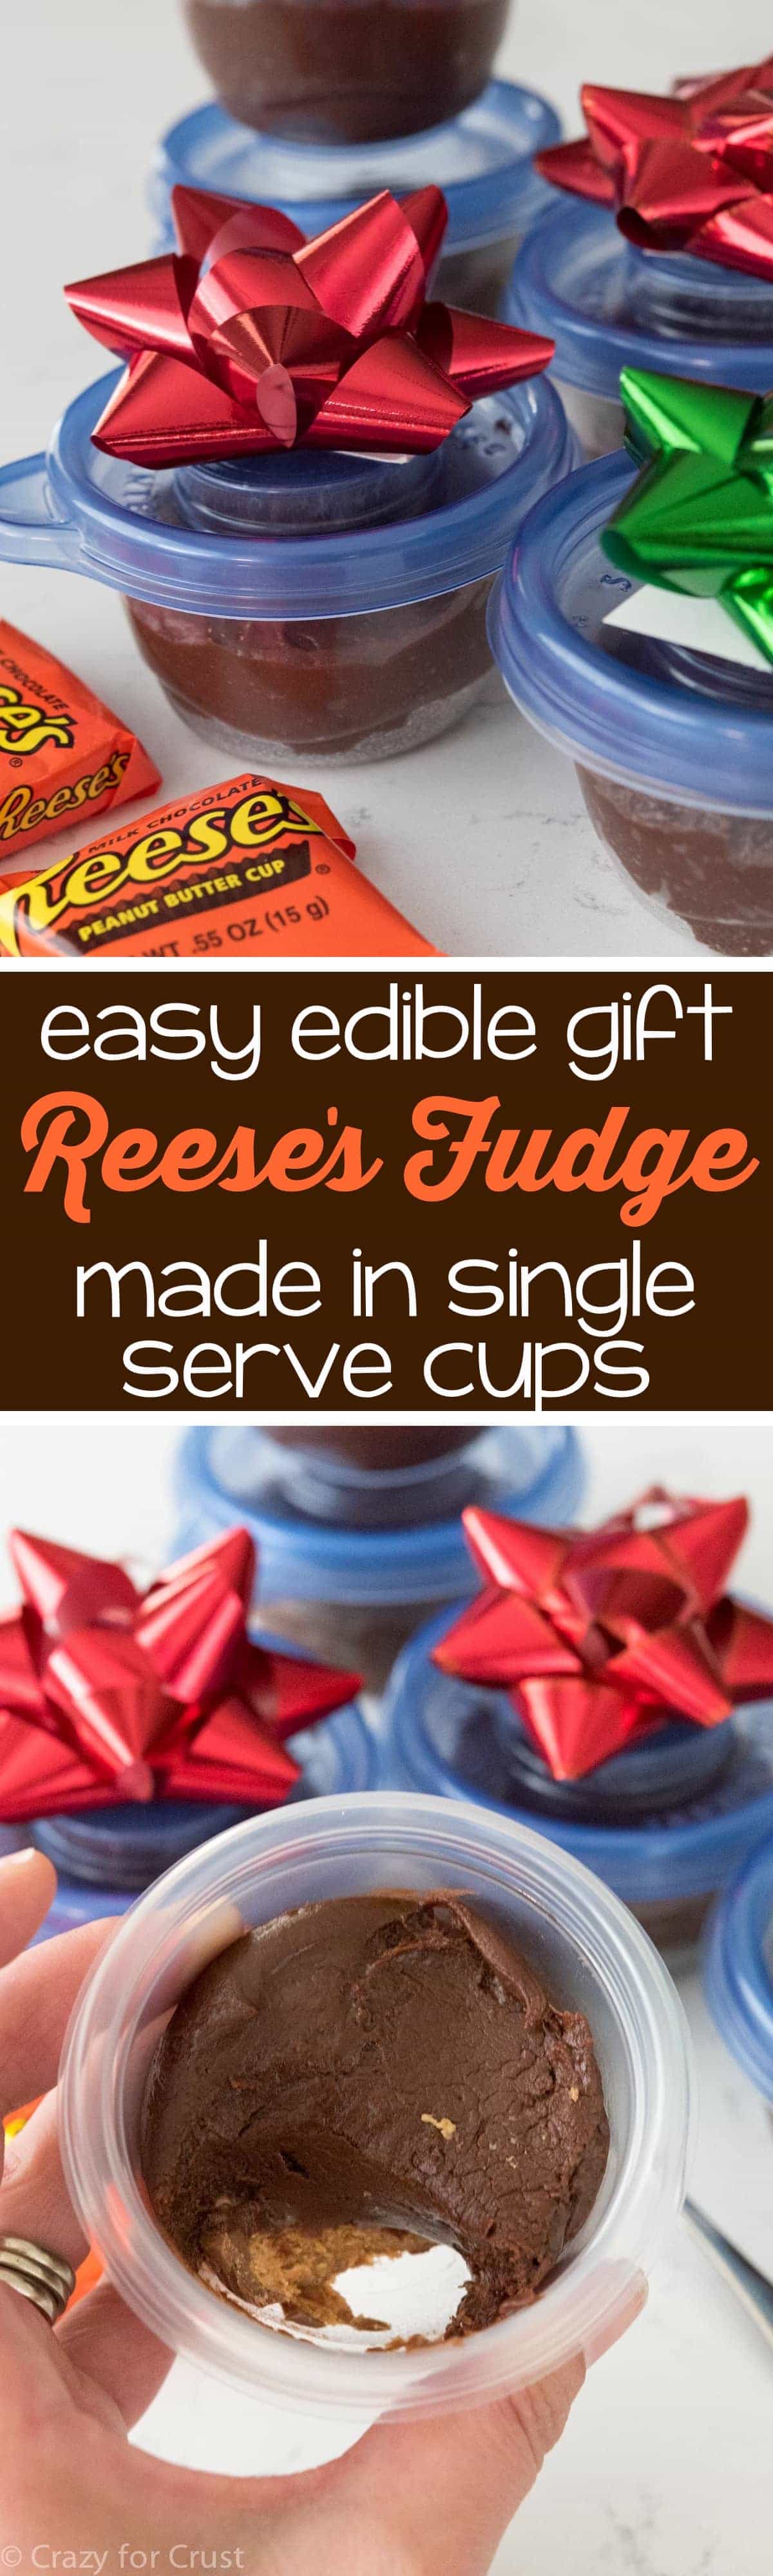 Package EASY 4 ingredient Reese's Fudge into single serve cups to make edible gifts!